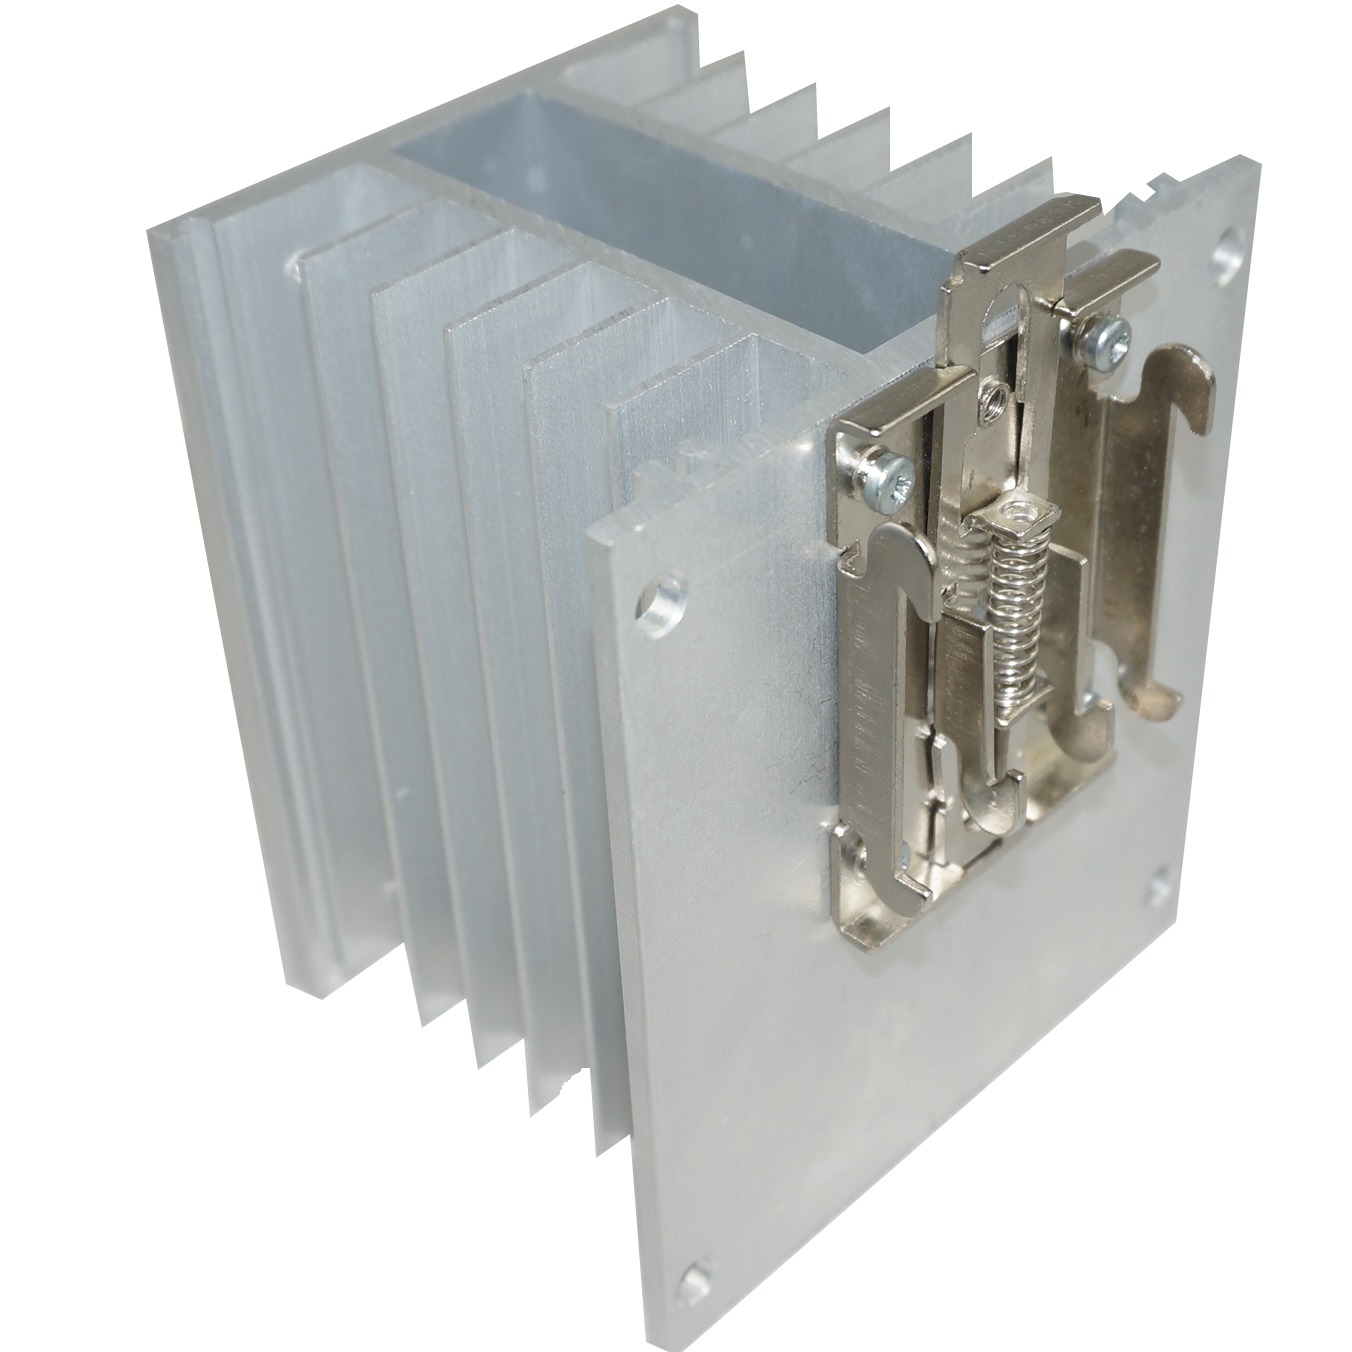 HS212DR, Heatsink 110mm, Milled, Drilled and Tapped for 3 Phase SSR, 1°C/W